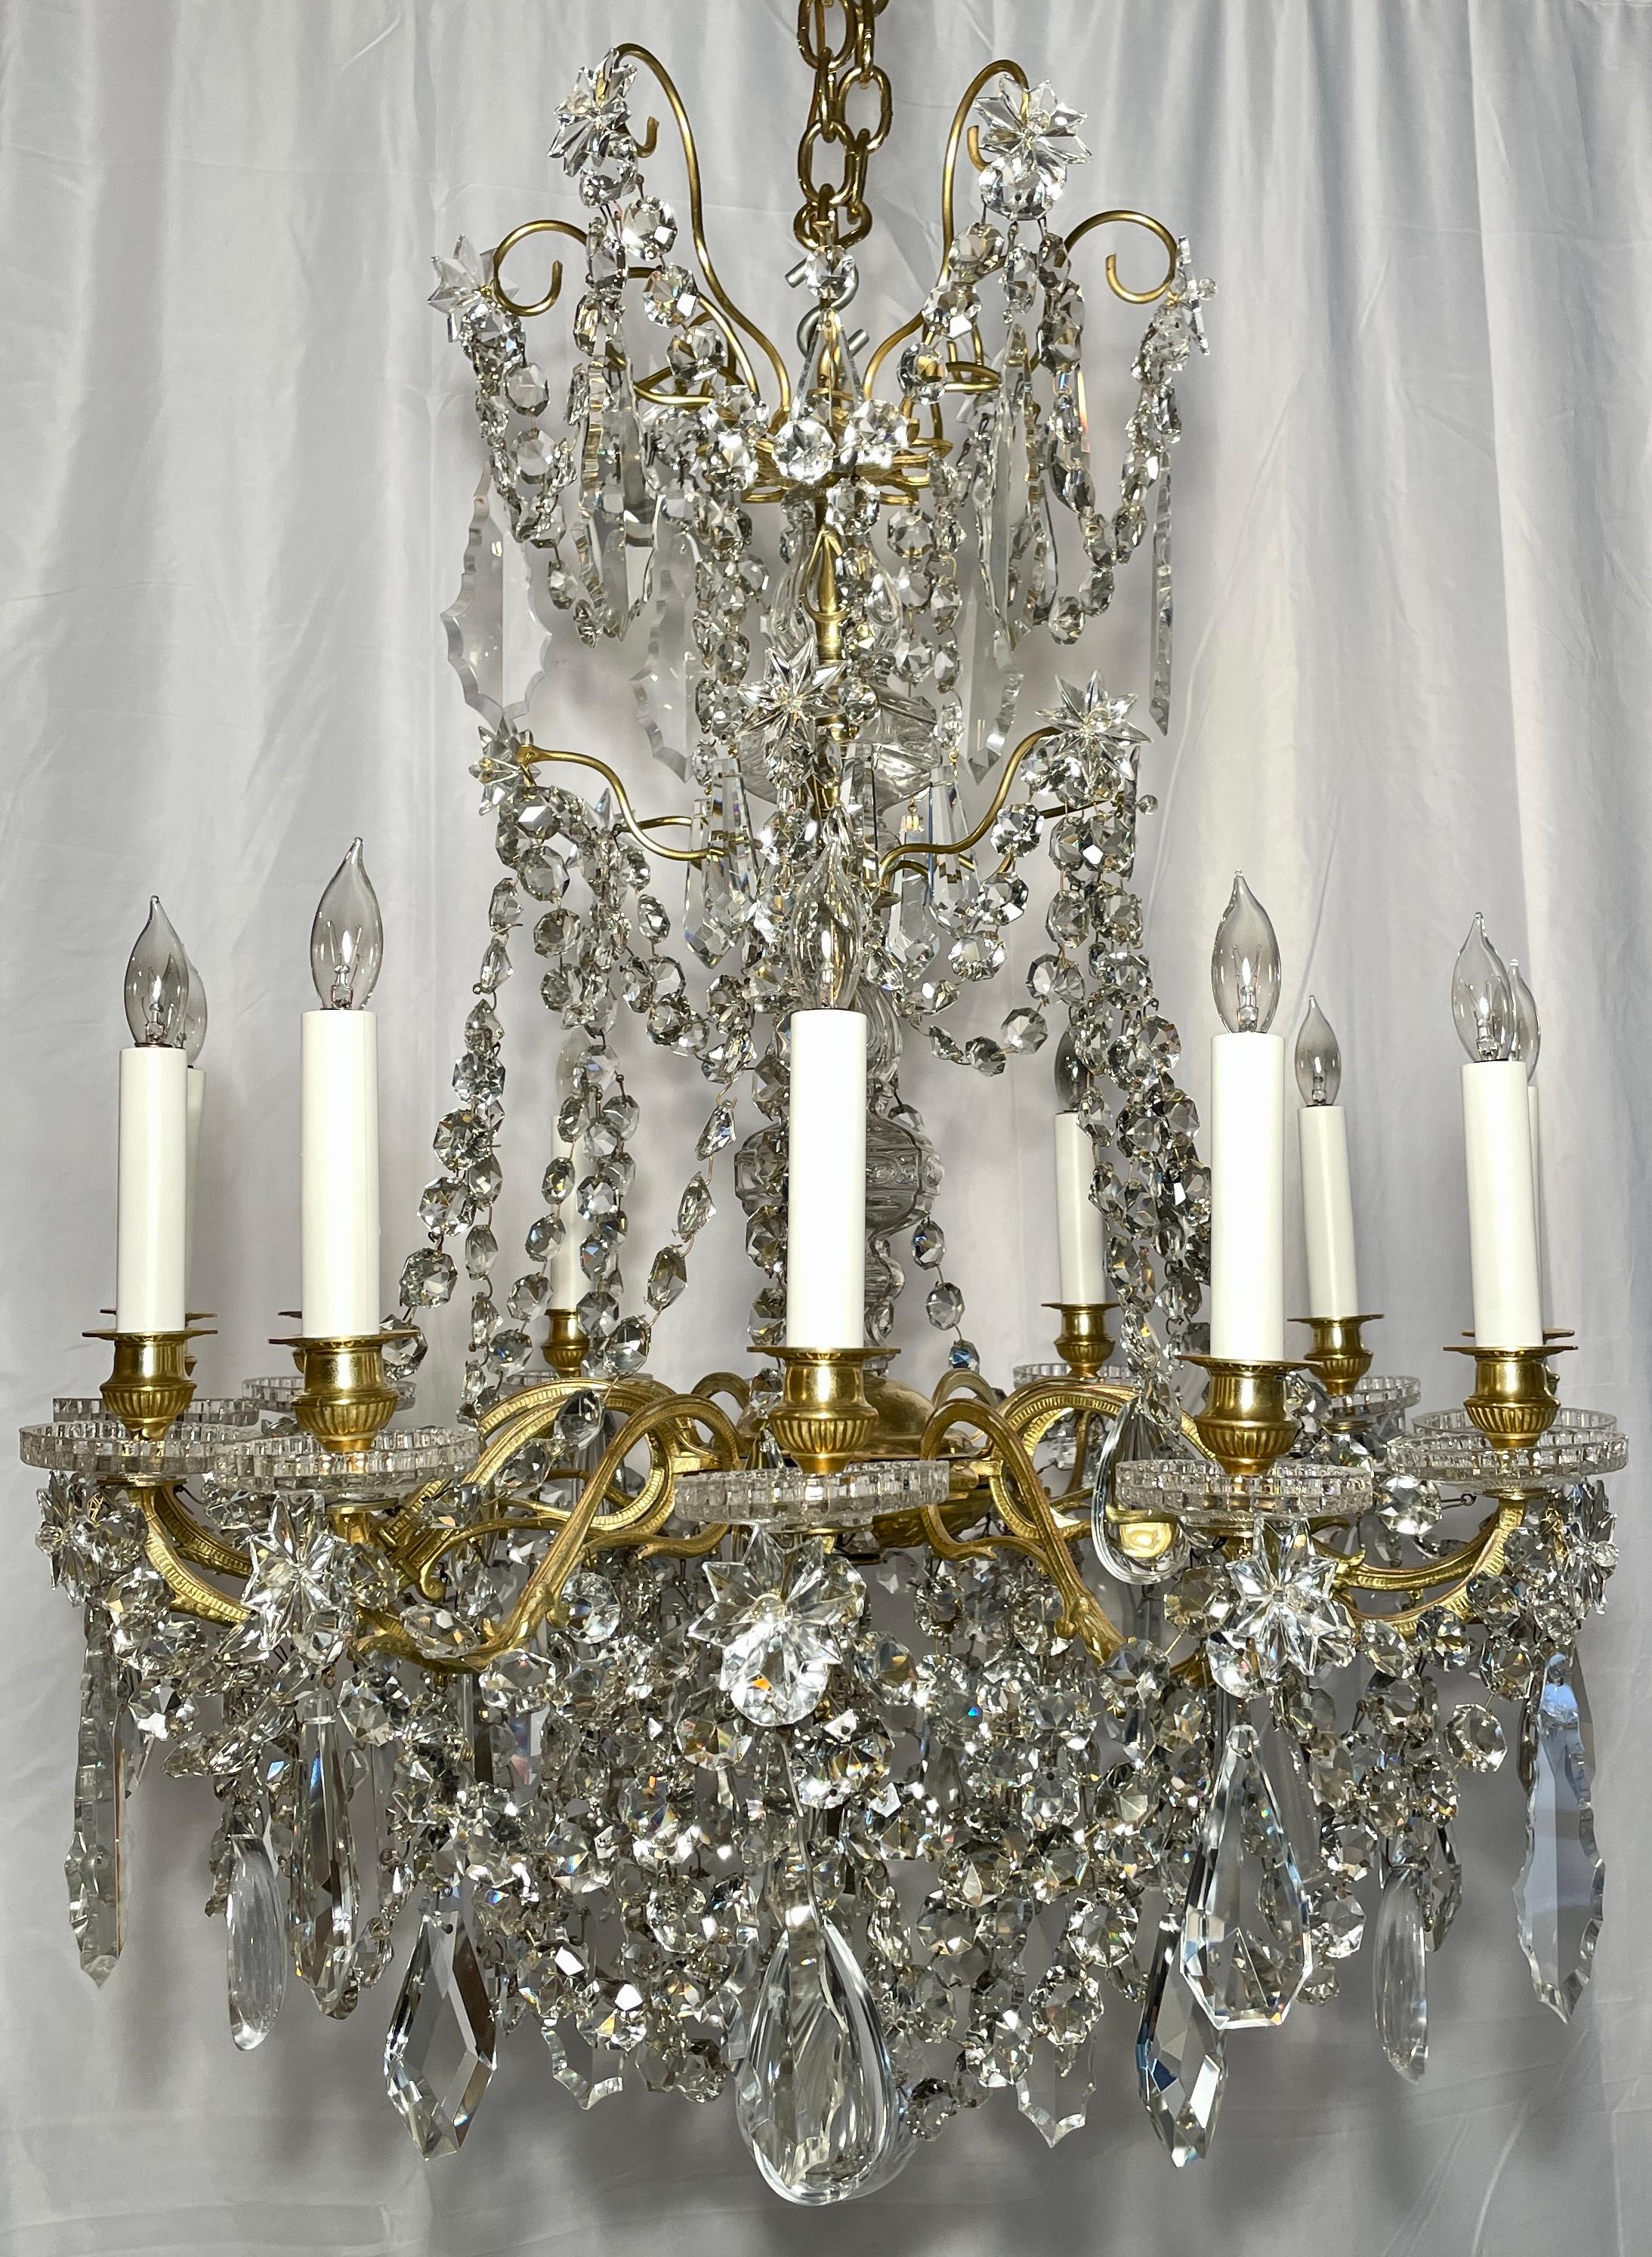 Antique French Finest Cut Crystal and Gold Bronze 12-Light Chandelier, Circa 1875-1895.